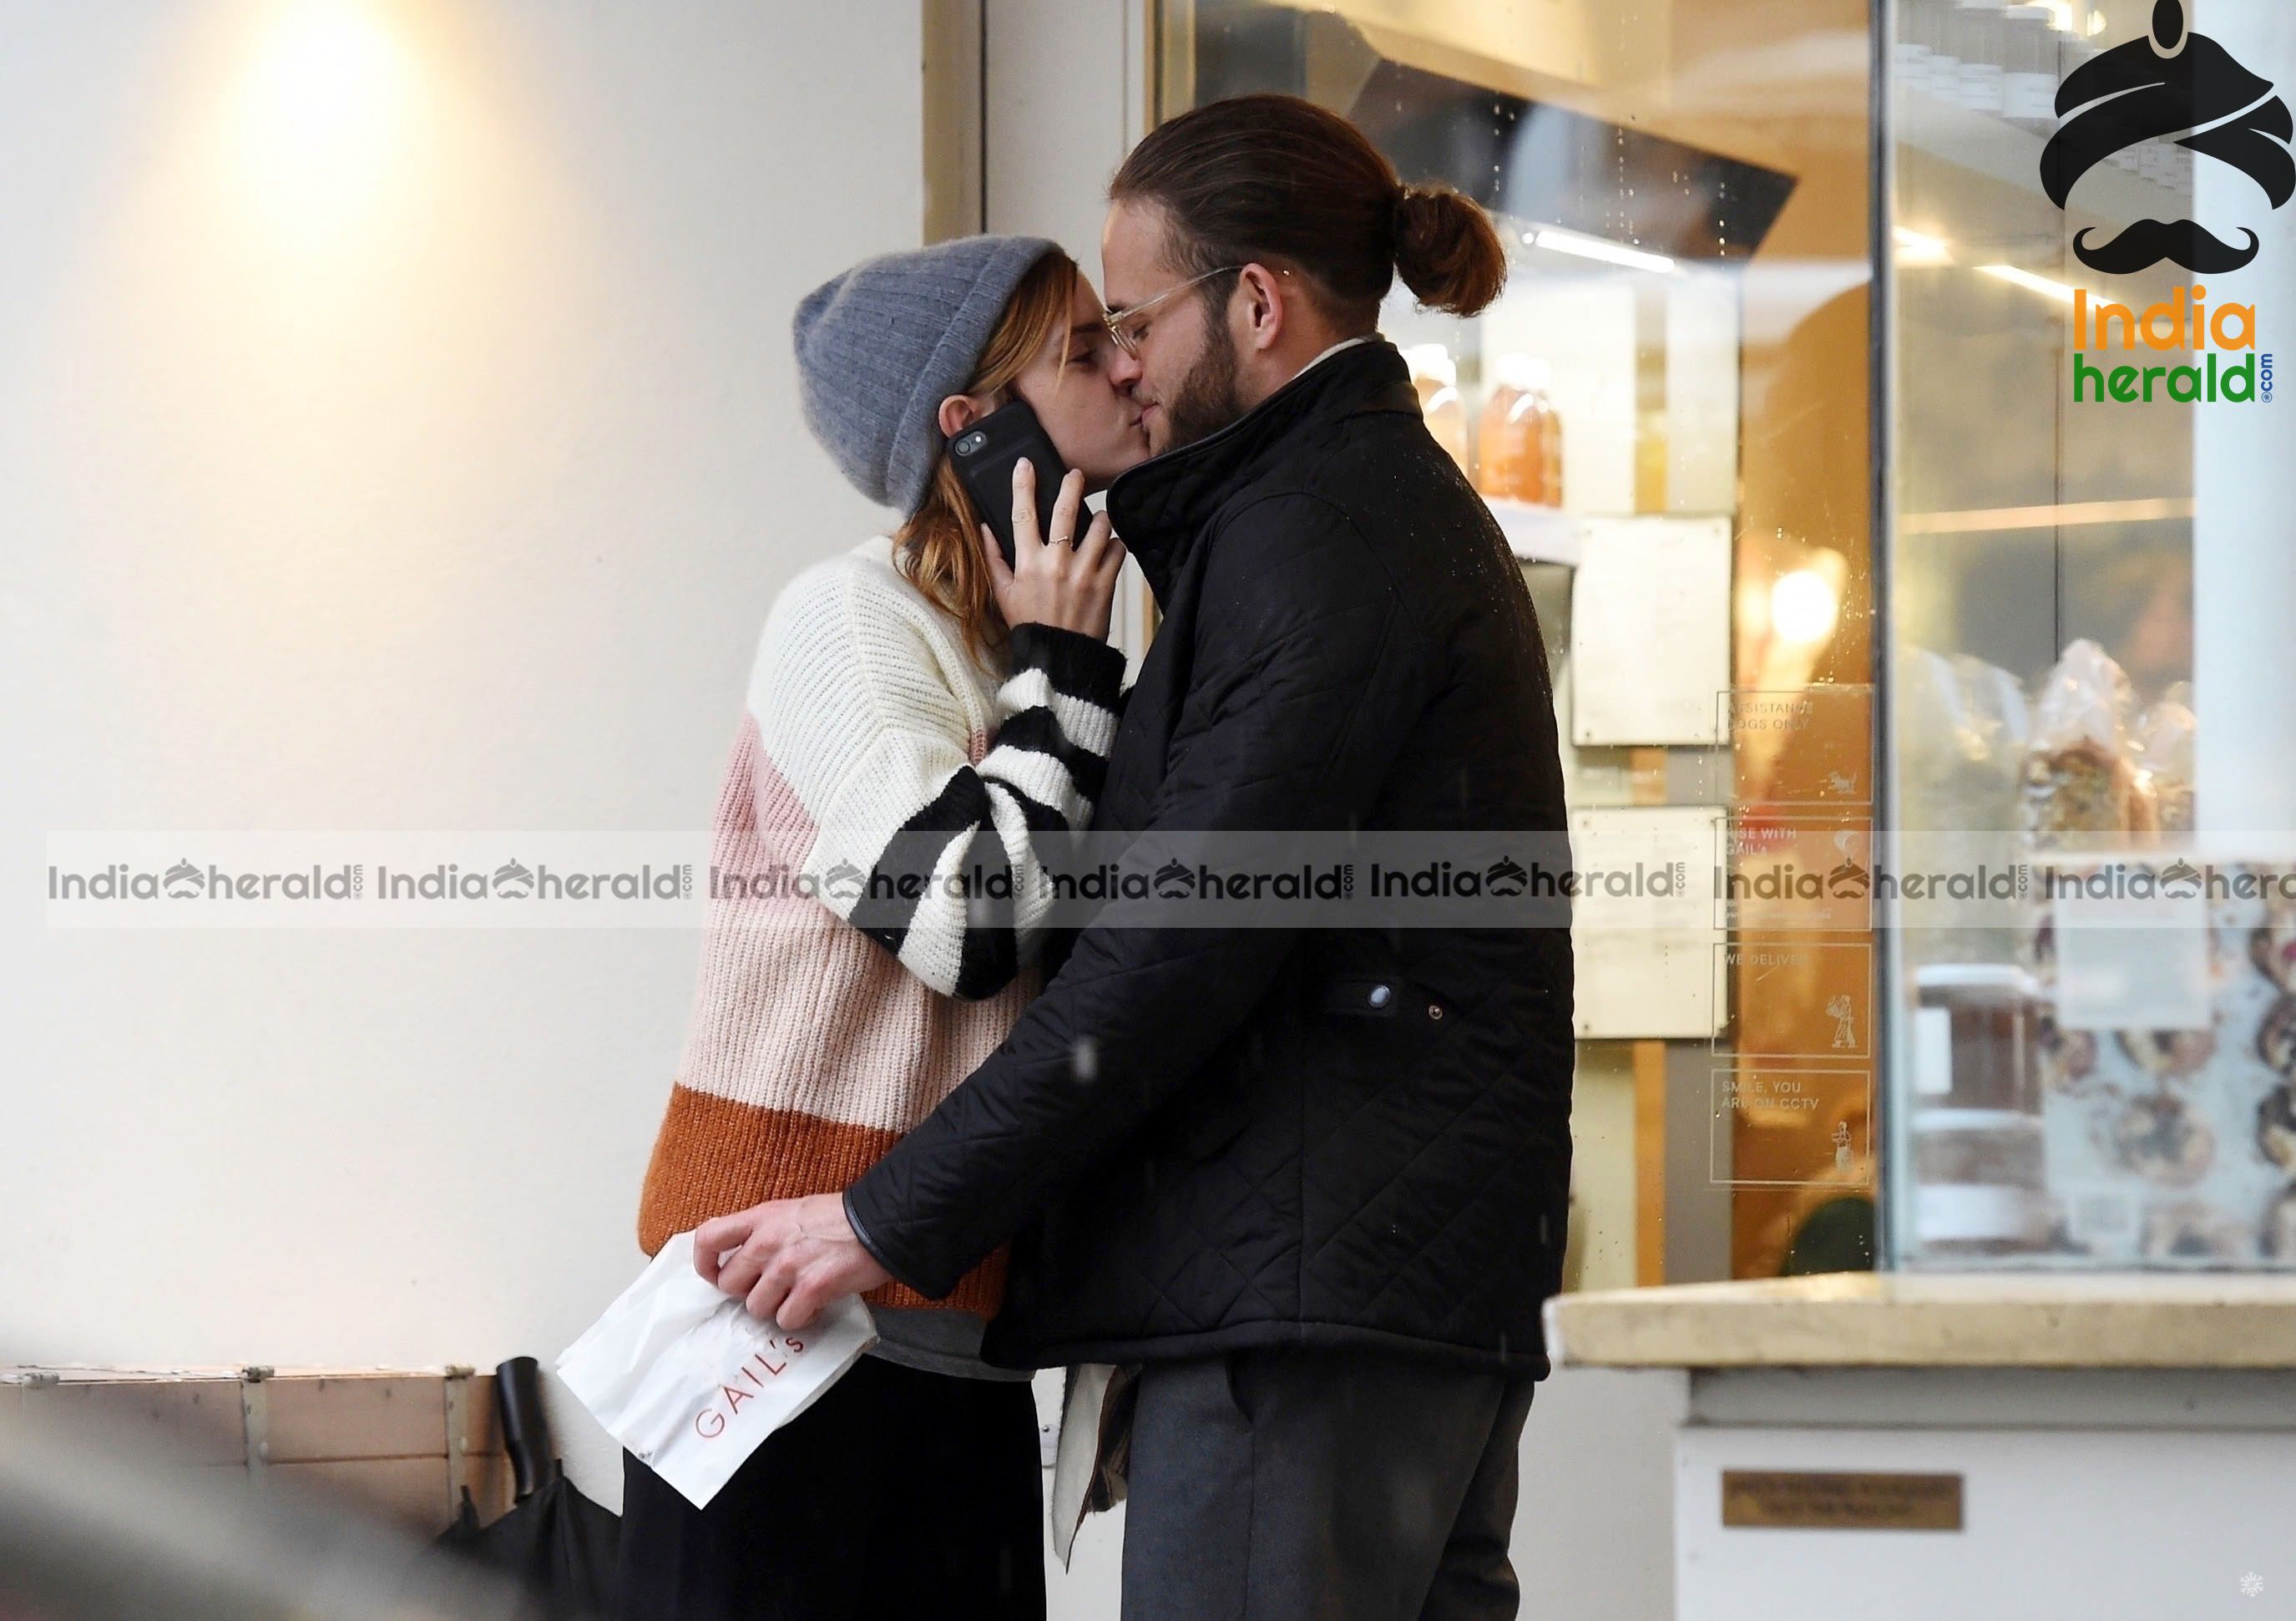 Harry Potter Girl Emma Watson Caught Kissing a Guy in Hotel Lobby